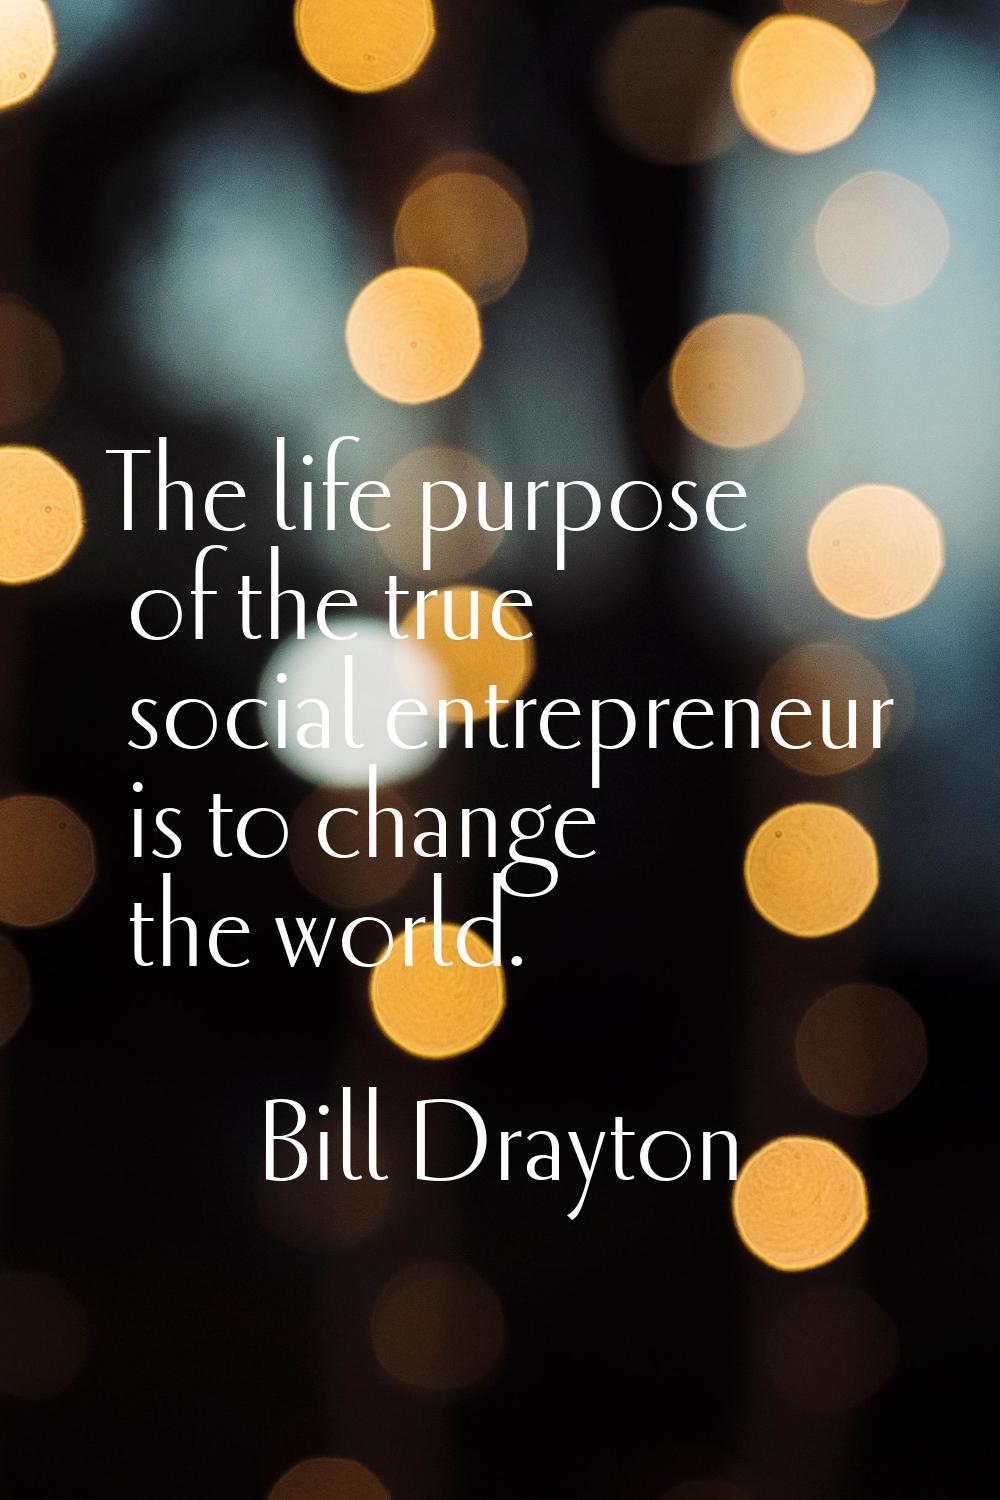 The life purpose of the true social entrepreneur is to change the world.